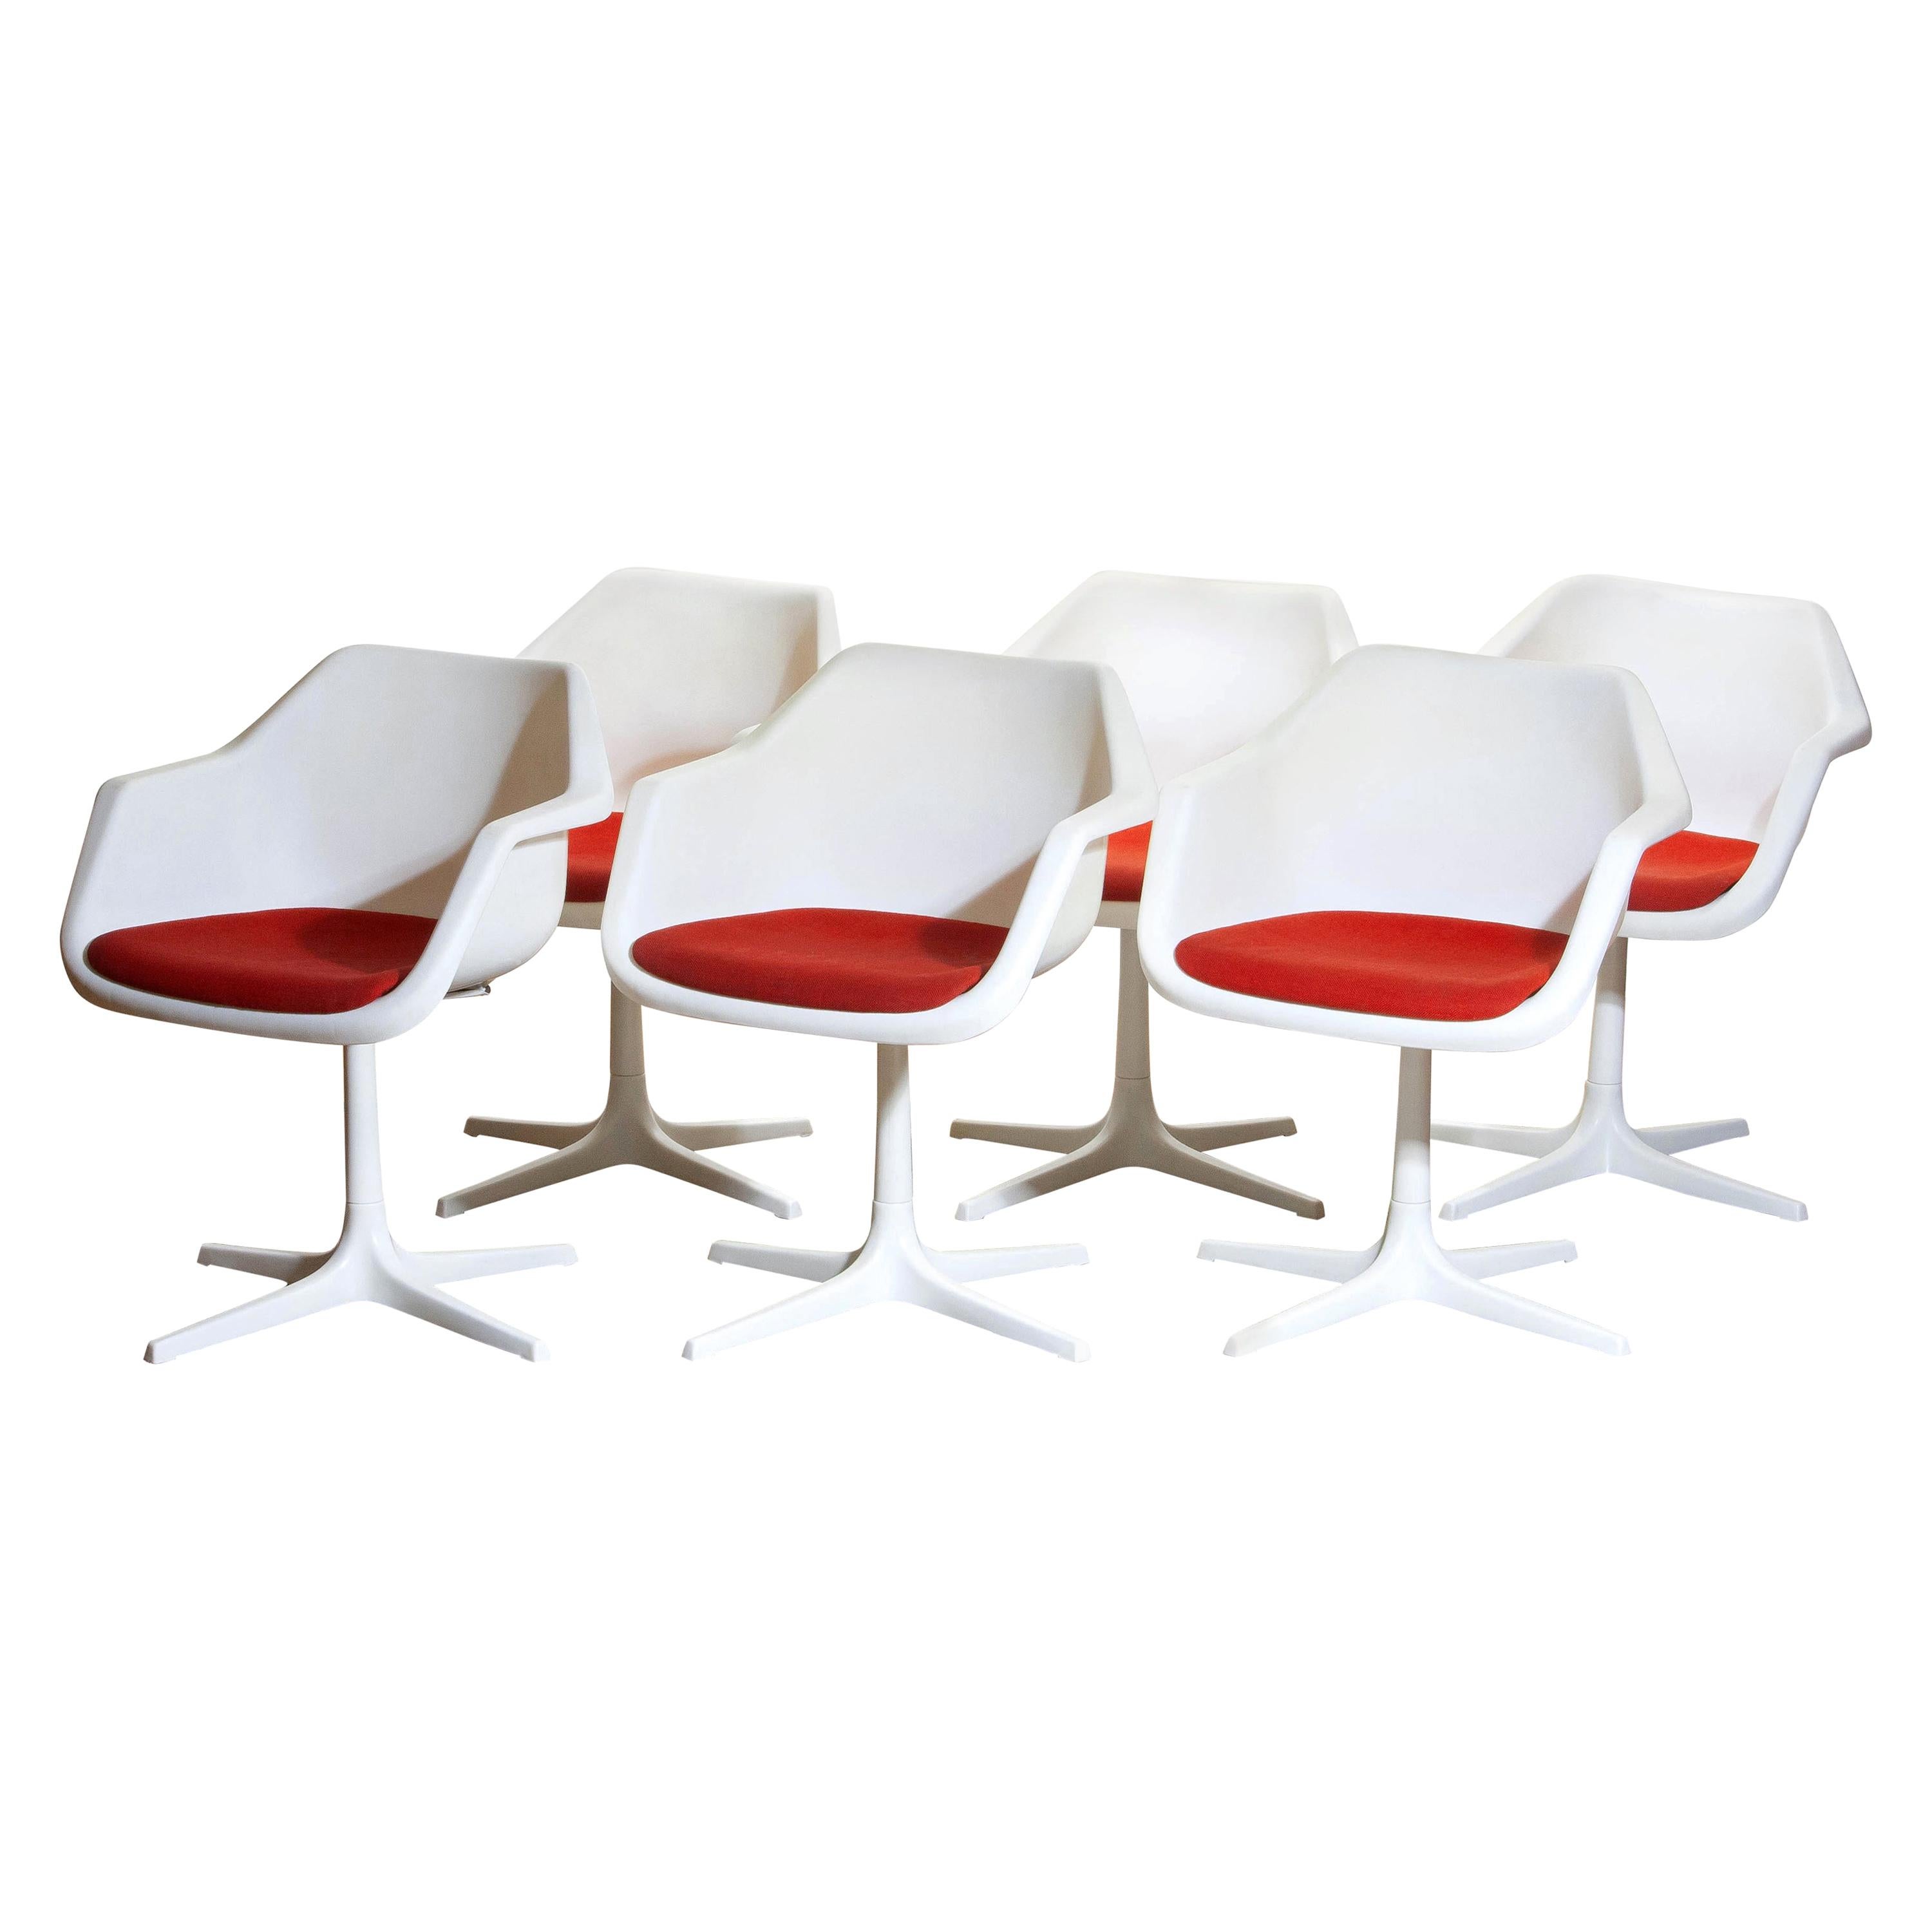 Beautiful and rare set of six swivel dining / office chairs designed by Robin Day for Hille, France, 1960s.
The overall condition is good. Fabric shows some stains. (Very easy to reupholster in your favorite fabric).